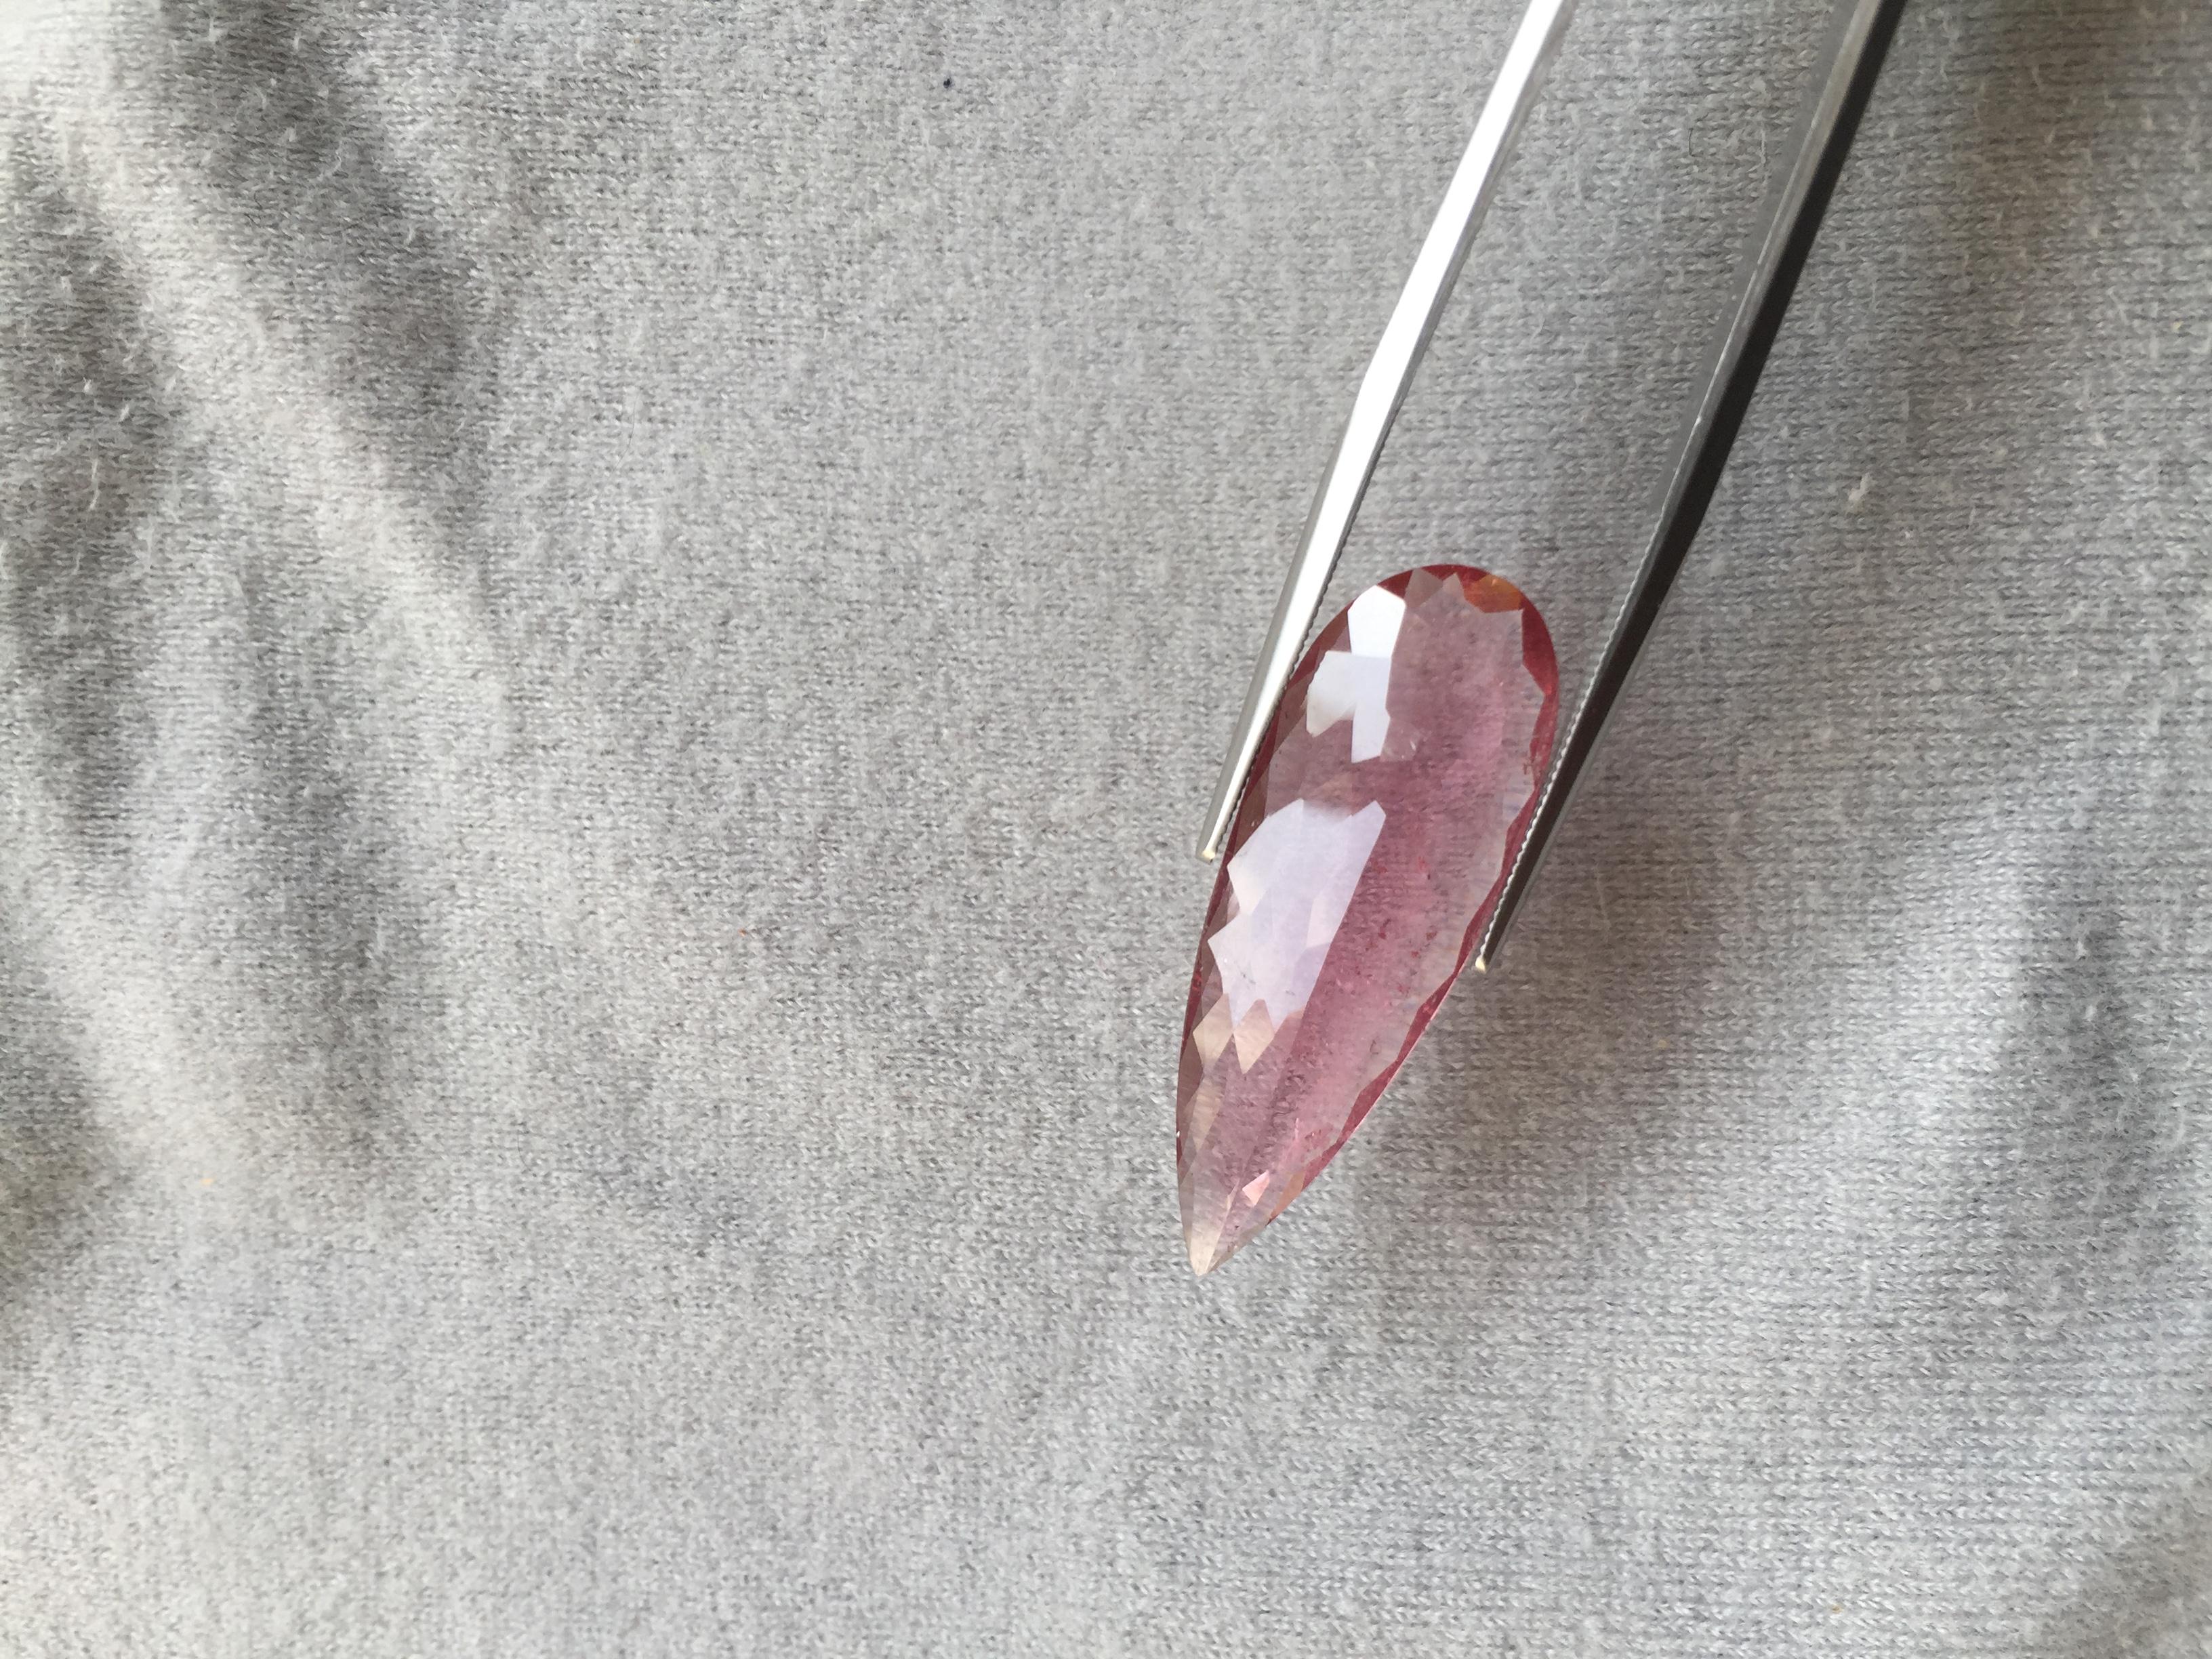 Introducing our 8.79 Carat Pink Tourmaline Pear Cut, the perfect gemstone for high-end jewelry. Crafted from high-quality tourmaline, this stunning gemstone features a gorgeous pink hue that is both elegant and sophisticated. The elongated pear cut